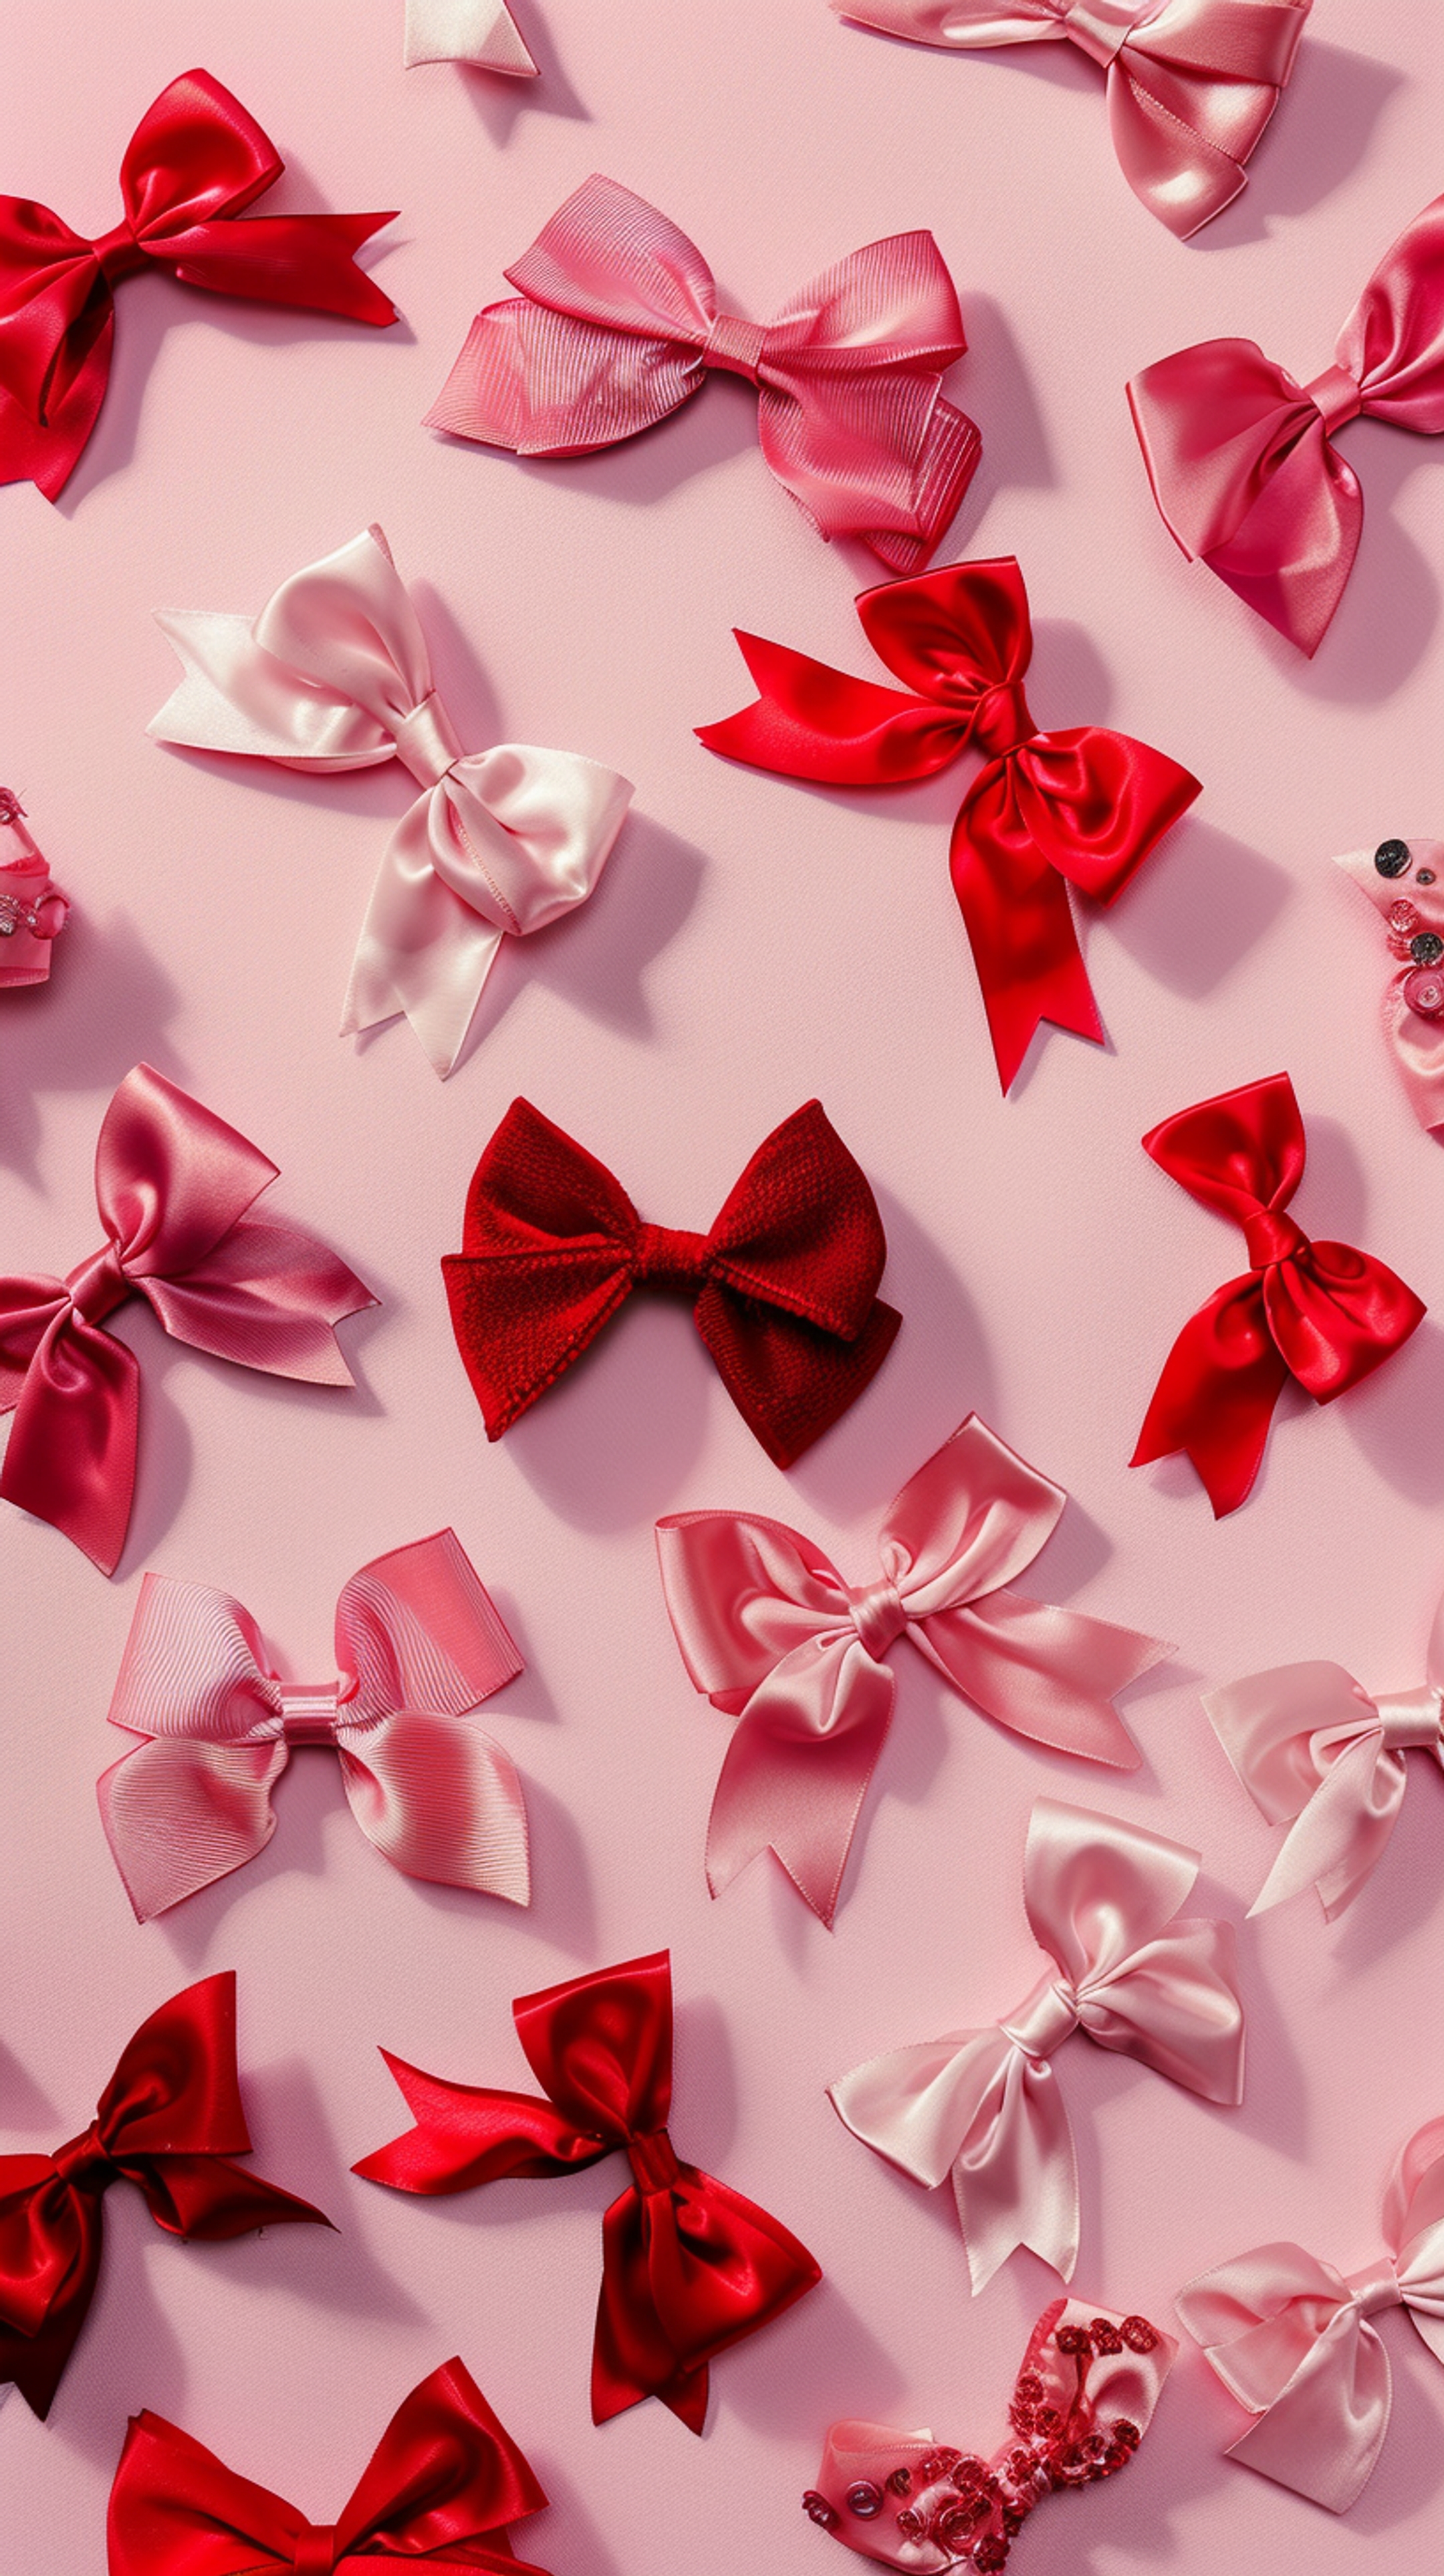 Pretty Pink Bows for Your Screen Ფონი[b7a269512d7d4883b181]